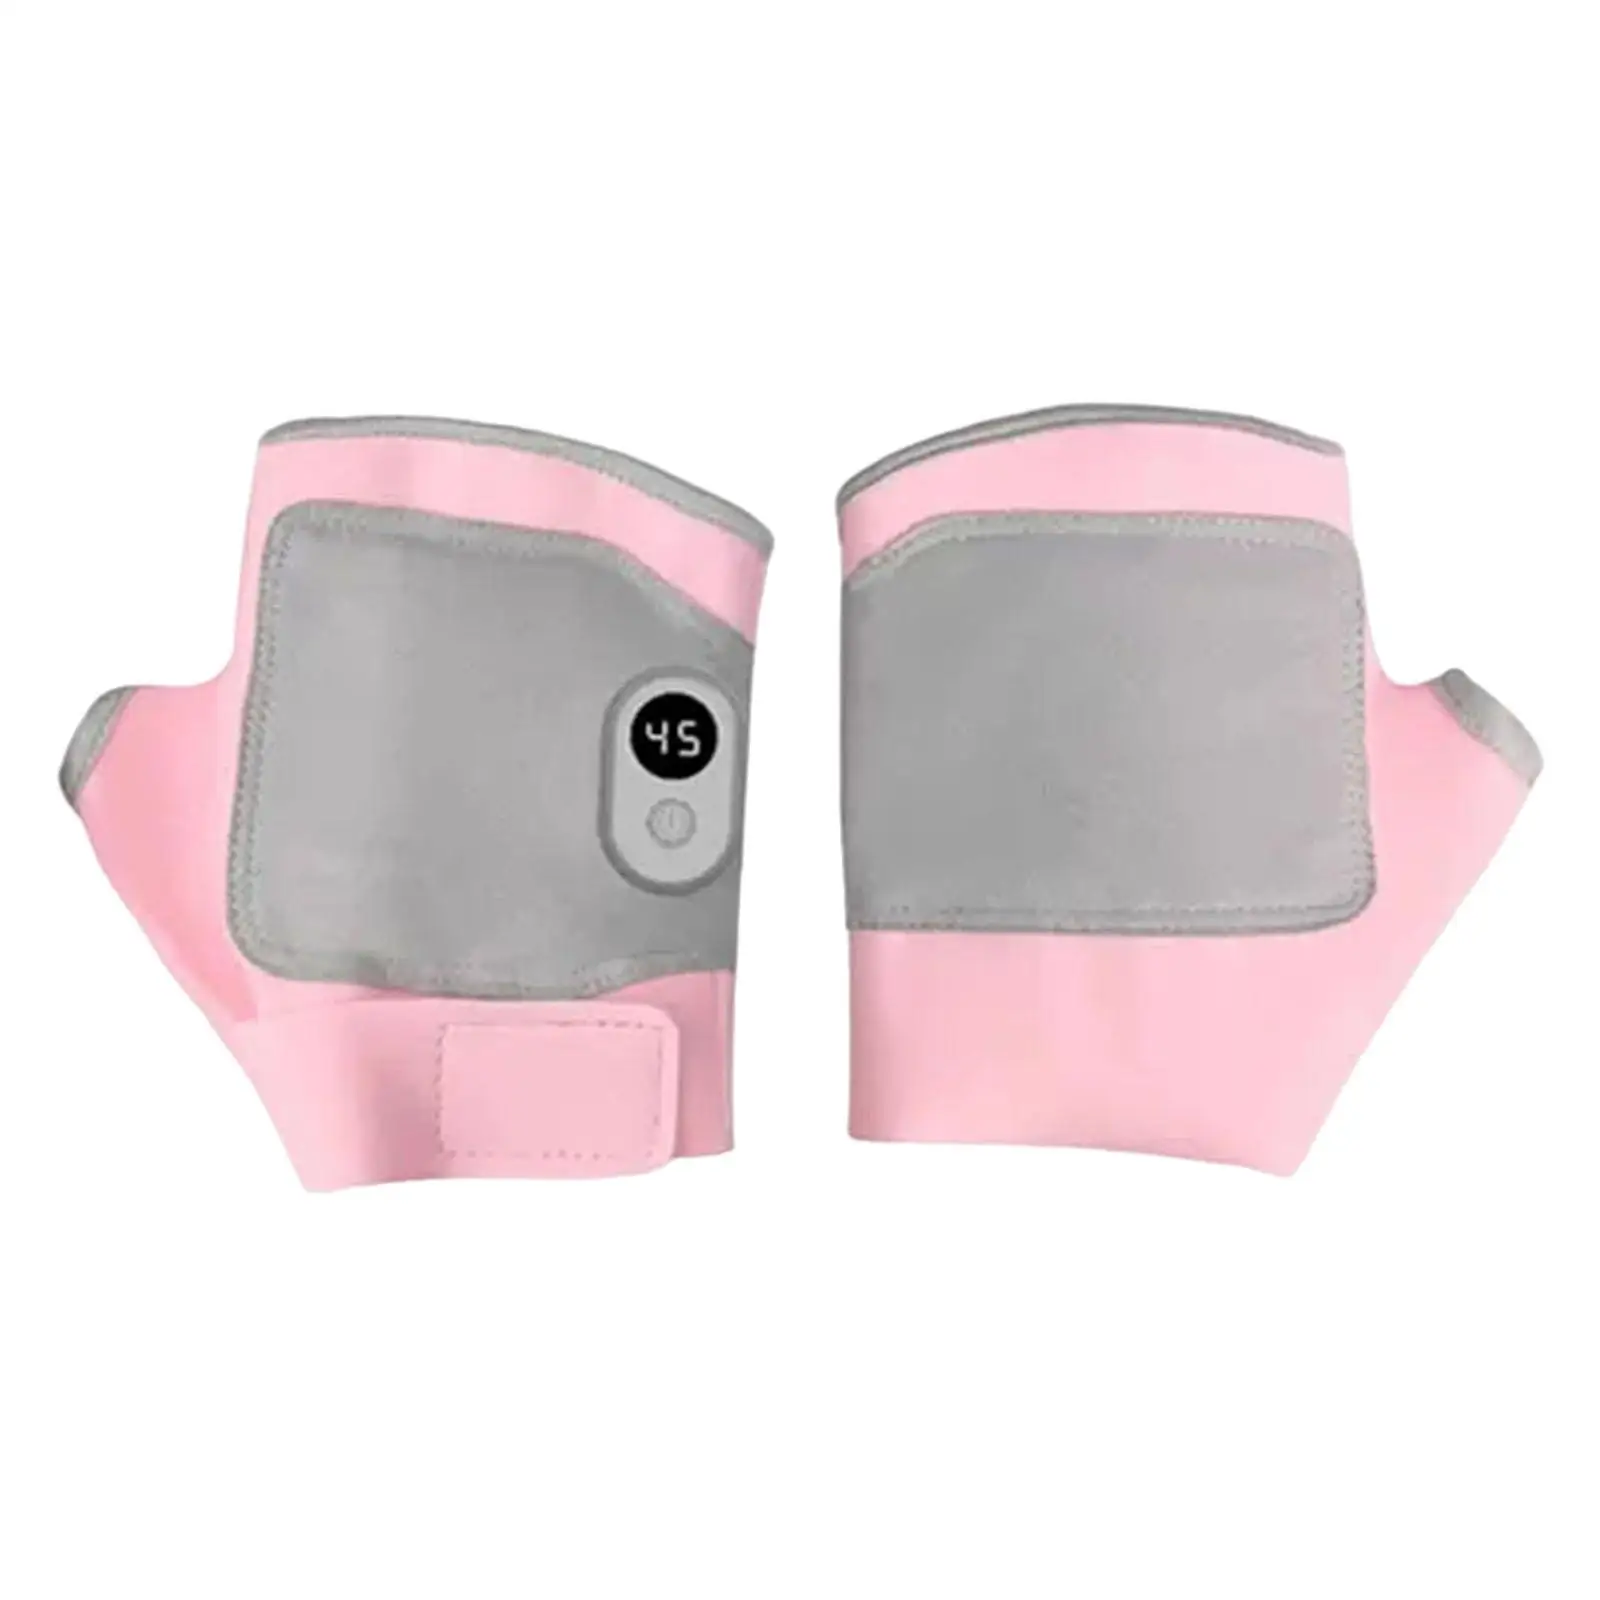 USB Heated Gloves with 3 Temperature Levels Mitten for Gaming